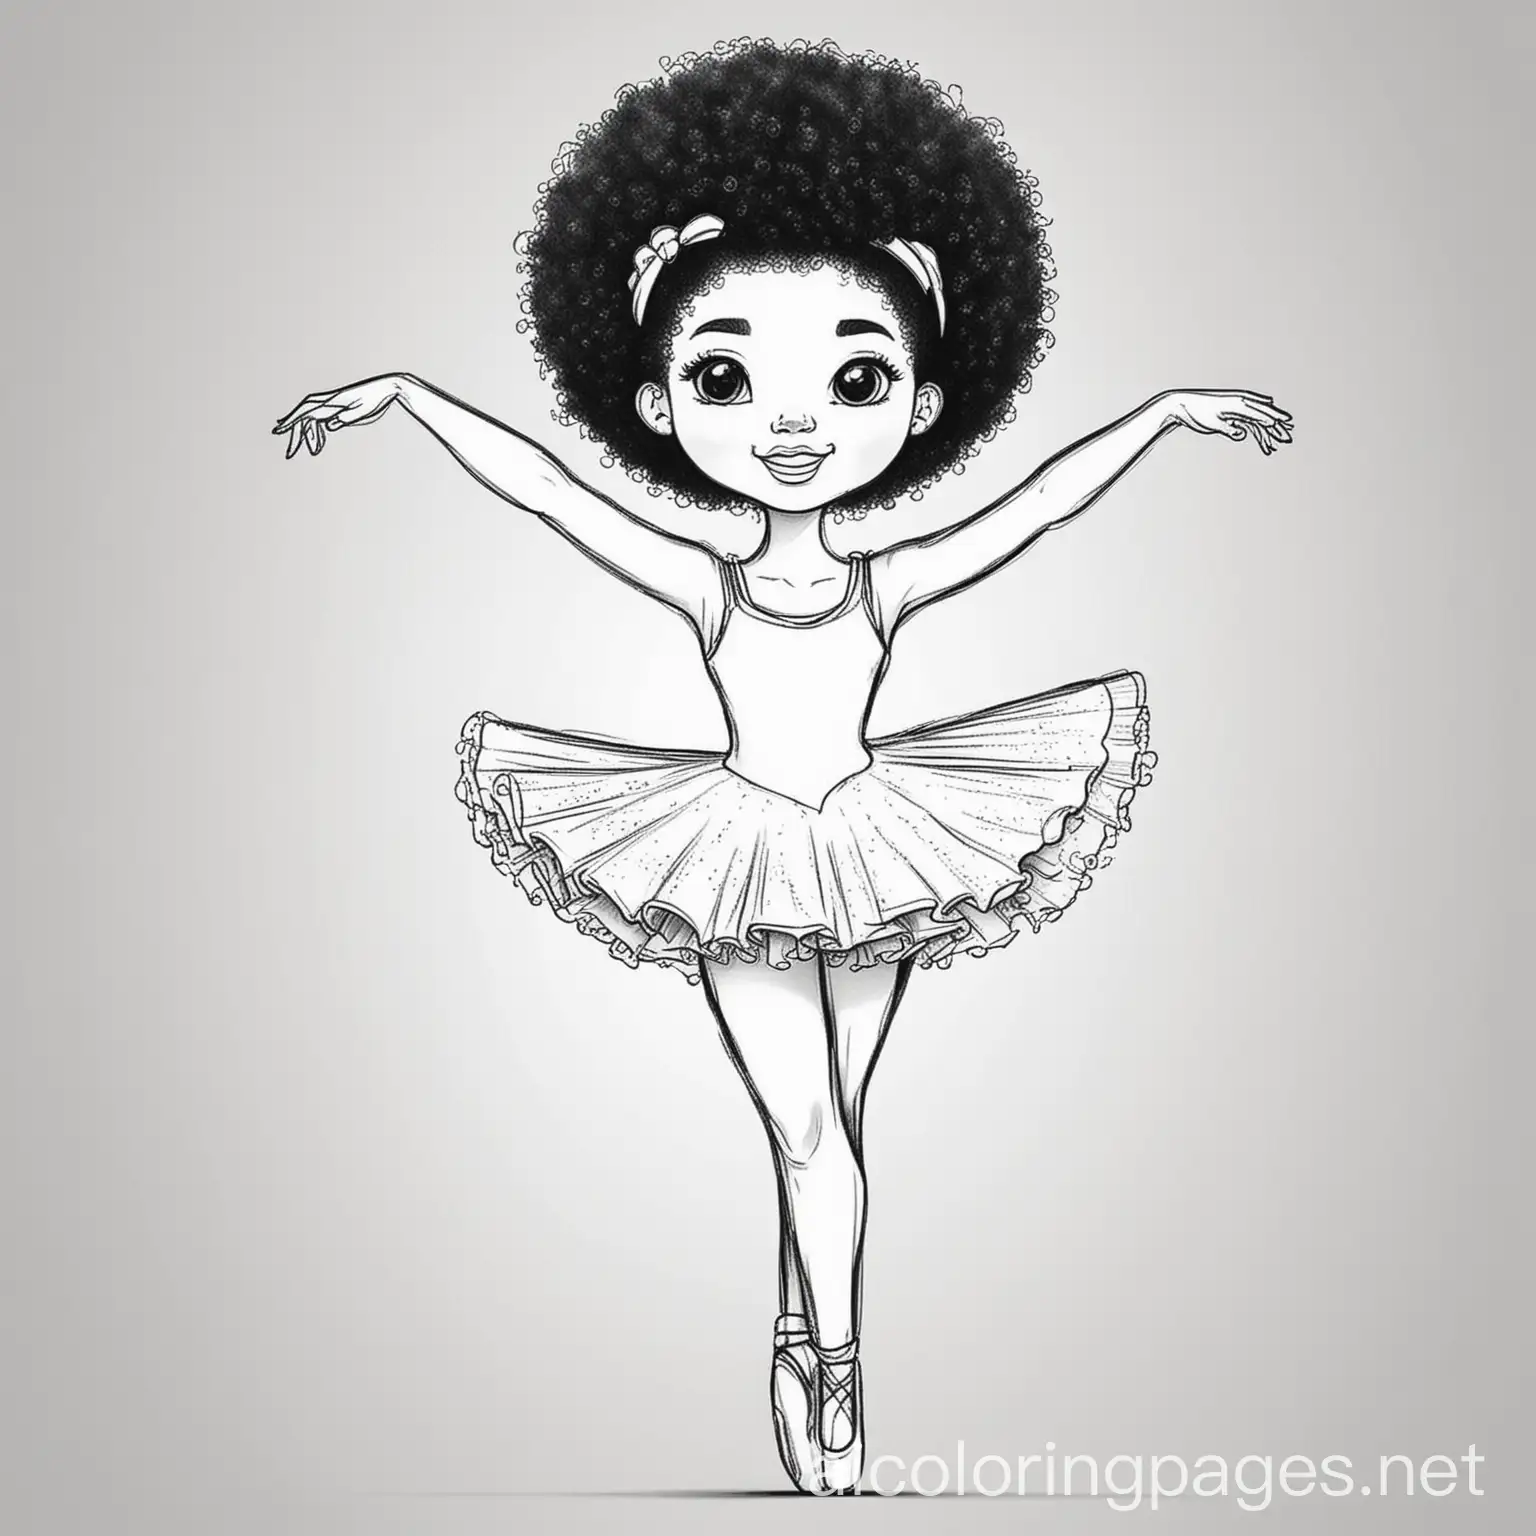 Ballerina-with-Afro-Dancing-Coloring-Page-Line-Art-for-Kids